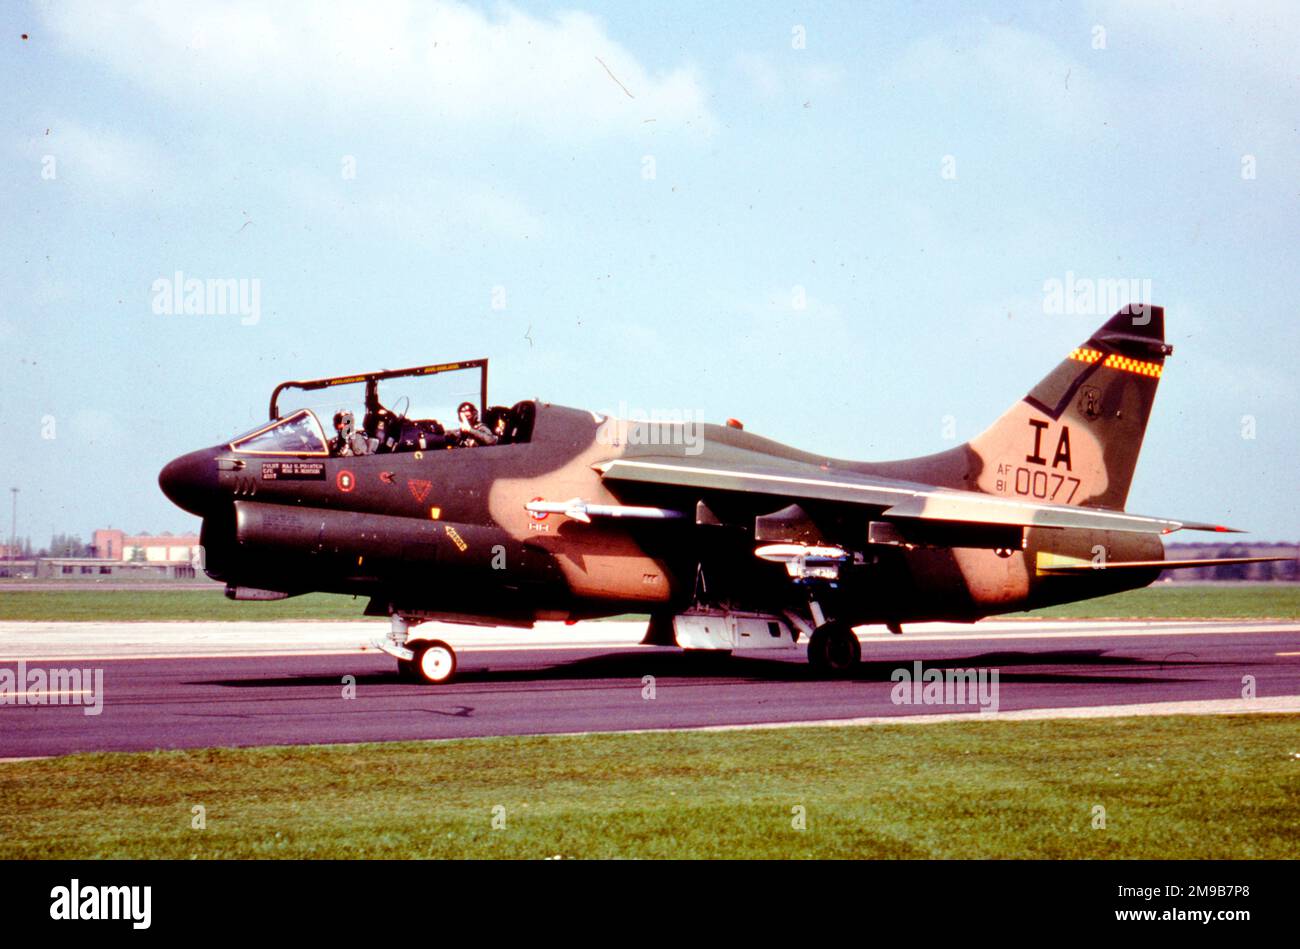 United States Air Force (USAF) - Ling-Temco-Vought A-7K Corsair II 81-0077 (MSN K-030, Basiscode 'IA'), iowa ANG, 124. TFS (132. TFG), basierend auf der KARTE des Moines, IA. Stockfoto